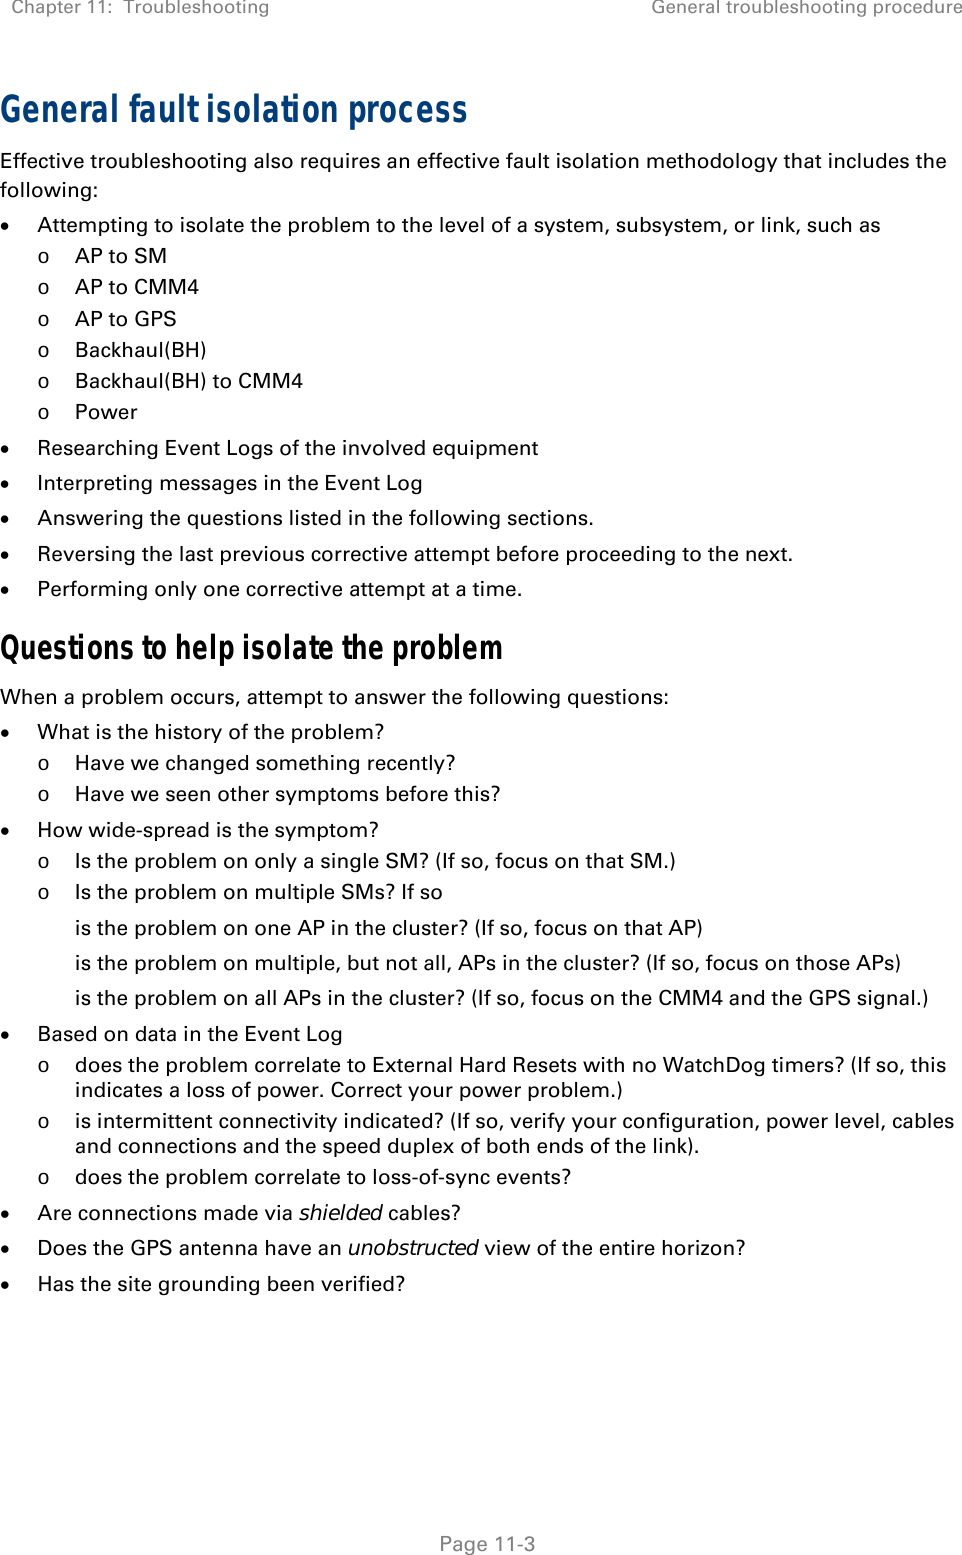 Chapter 11:  Troubleshooting  General troubleshooting procedure   Page 11-3 General fault isolation process Effective troubleshooting also requires an effective fault isolation methodology that includes the following:  Attempting to isolate the problem to the level of a system, subsystem, or link, such as o AP to SM o AP to CMM4 o AP to GPS o Backhaul(BH) o Backhaul(BH) to CMM4 o Power  Researching Event Logs of the involved equipment   Interpreting messages in the Event Log  Answering the questions listed in the following sections.  Reversing the last previous corrective attempt before proceeding to the next.  Performing only one corrective attempt at a time. Questions to help isolate the problem When a problem occurs, attempt to answer the following questions:  What is the history of the problem? o Have we changed something recently? o Have we seen other symptoms before this?  How wide-spread is the symptom?  o Is the problem on only a single SM? (If so, focus on that SM.) o Is the problem on multiple SMs? If so is the problem on one AP in the cluster? (If so, focus on that AP) is the problem on multiple, but not all, APs in the cluster? (If so, focus on those APs) is the problem on all APs in the cluster? (If so, focus on the CMM4 and the GPS signal.)  Based on data in the Event Log  o does the problem correlate to External Hard Resets with no WatchDog timers? (If so, this indicates a loss of power. Correct your power problem.) o is intermittent connectivity indicated? (If so, verify your configuration, power level, cables and connections and the speed duplex of both ends of the link). o does the problem correlate to loss-of-sync events?  Are connections made via shielded cables?  Does the GPS antenna have an unobstructed view of the entire horizon?  Has the site grounding been verified?   